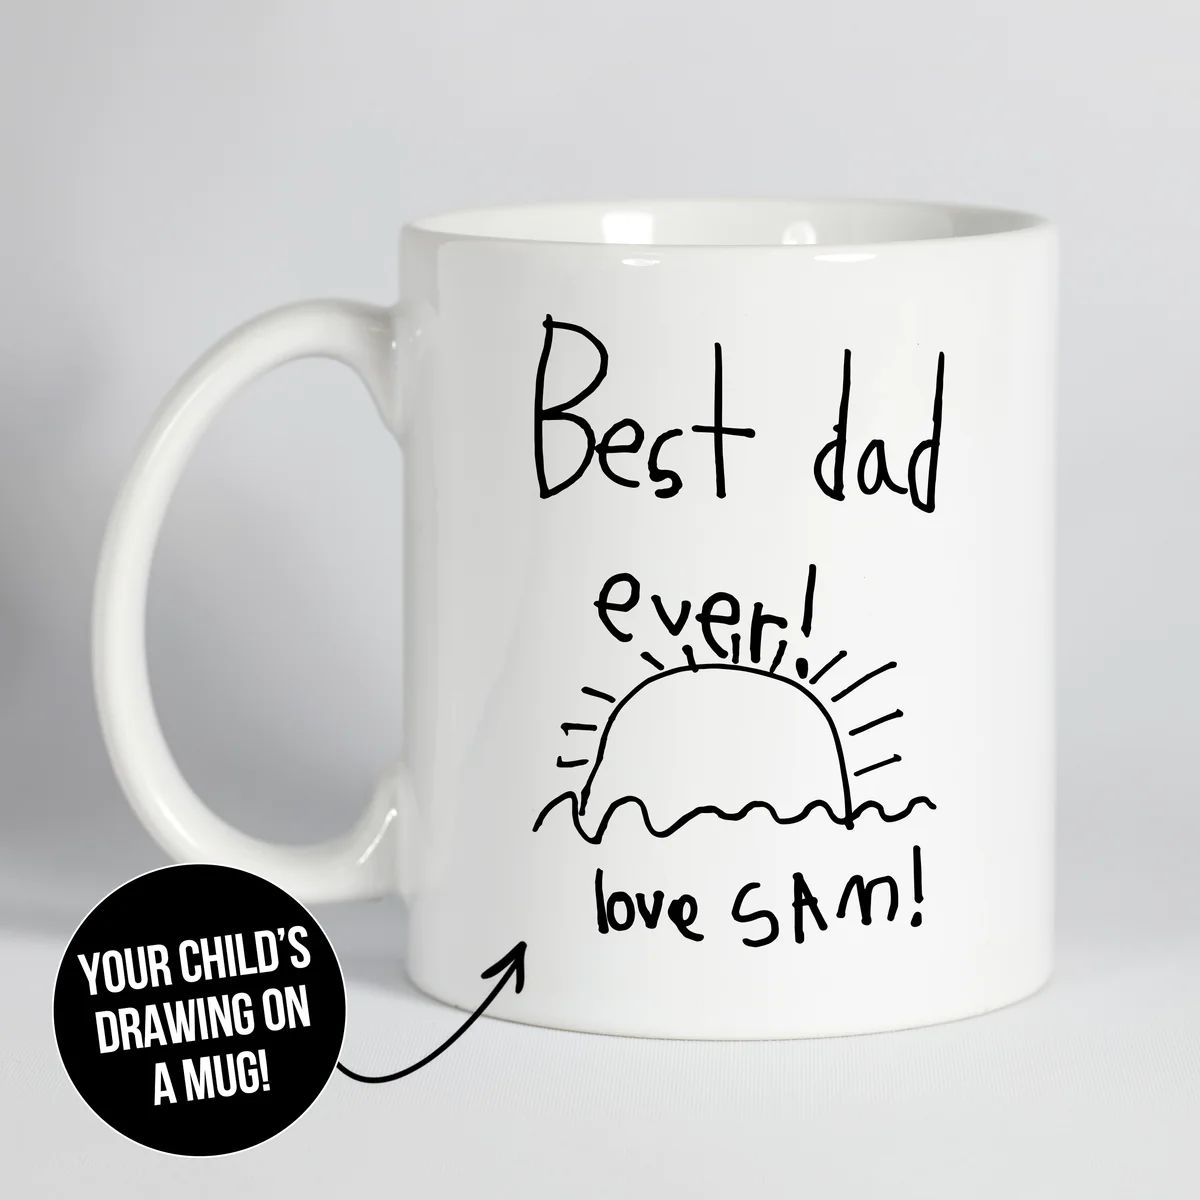 Your Child's Handwritten Note On A Mug | Type League Press